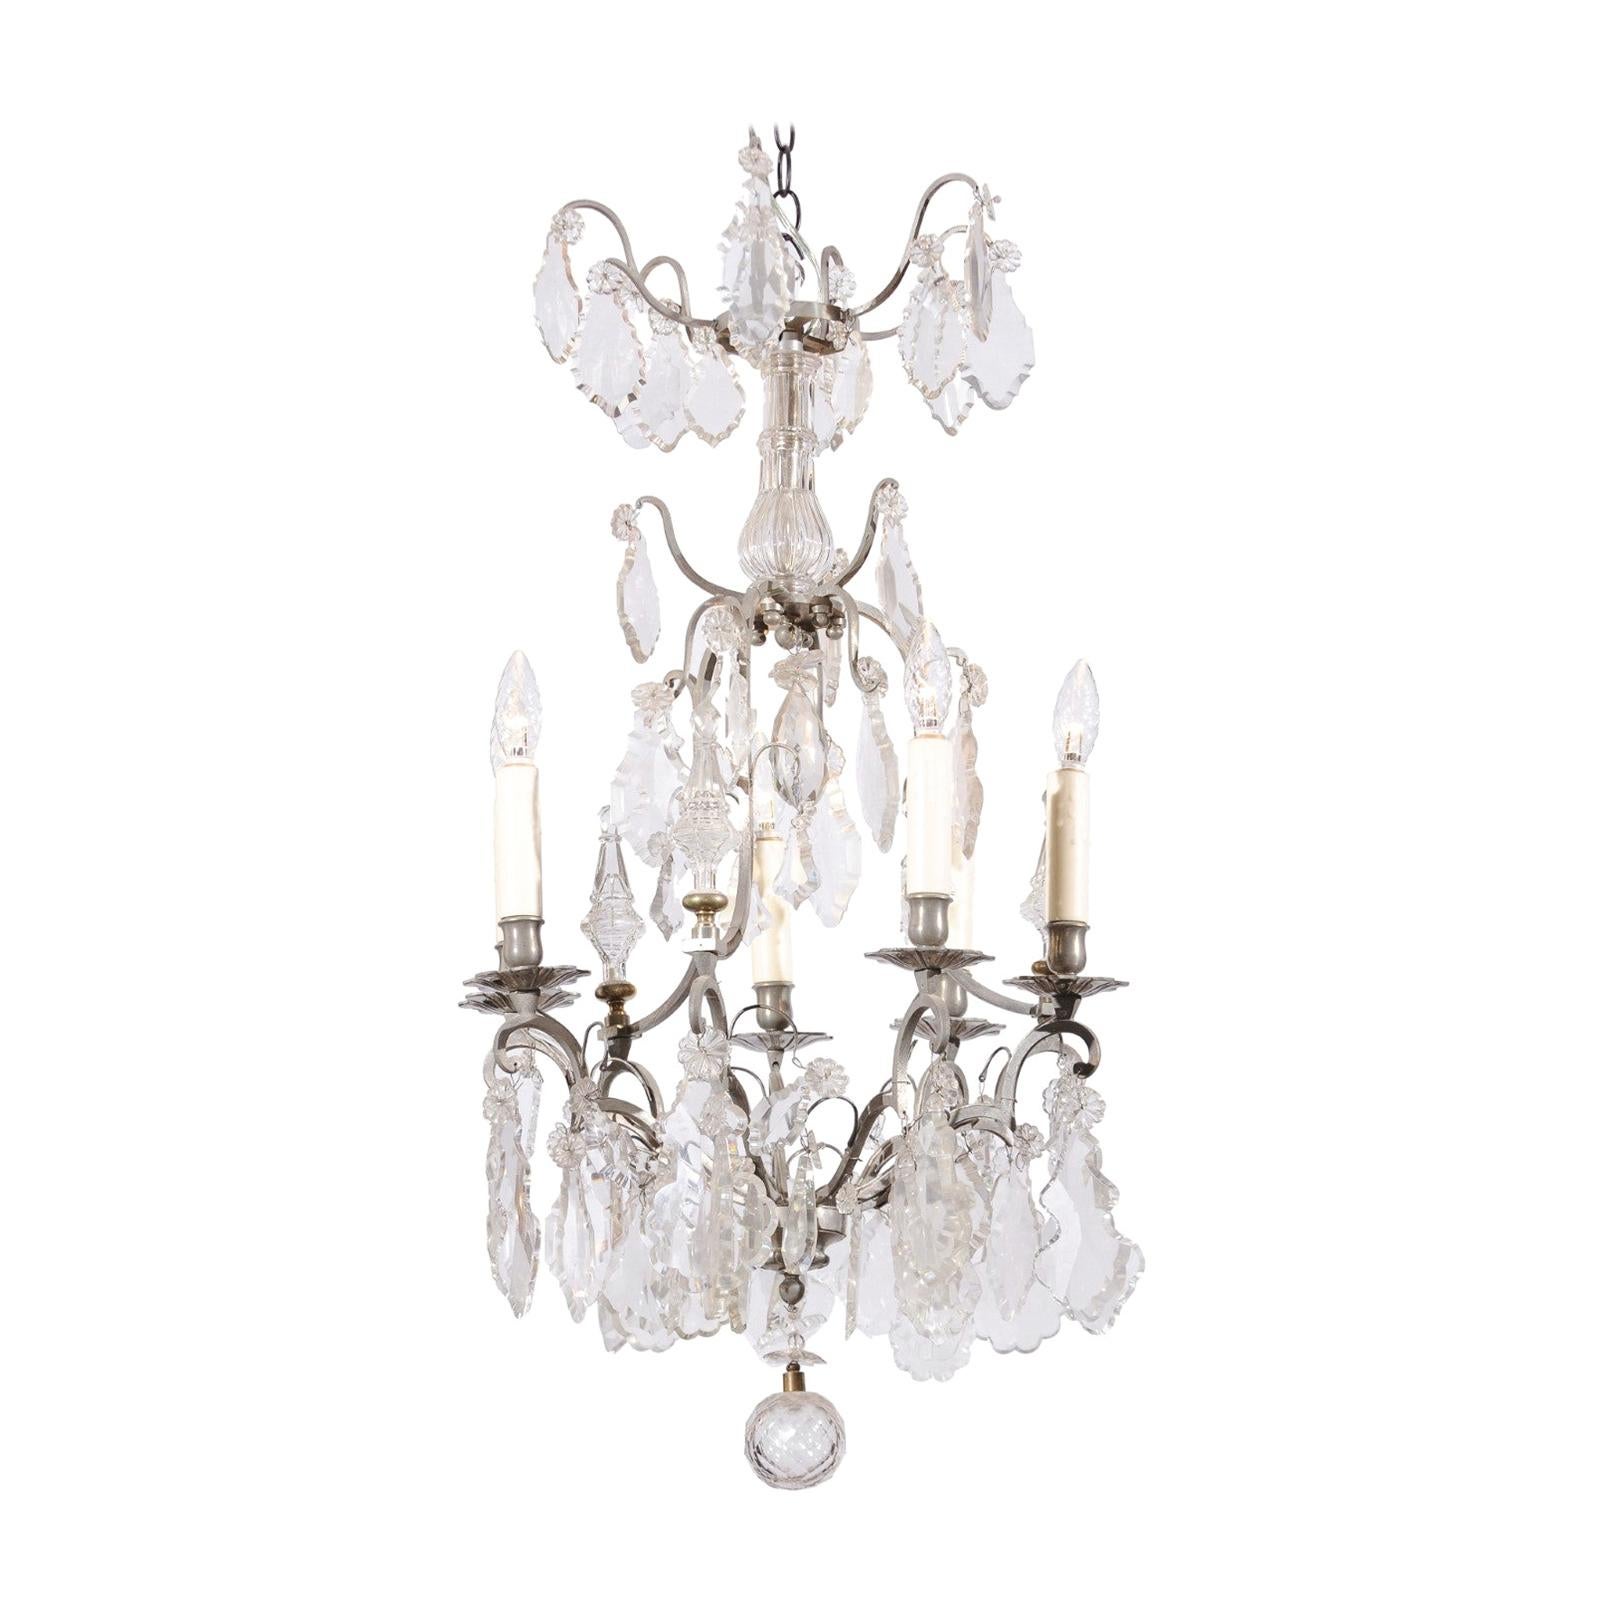 French 19th Century Six-Light Crystal Chandelier with Silvered Iron Armature